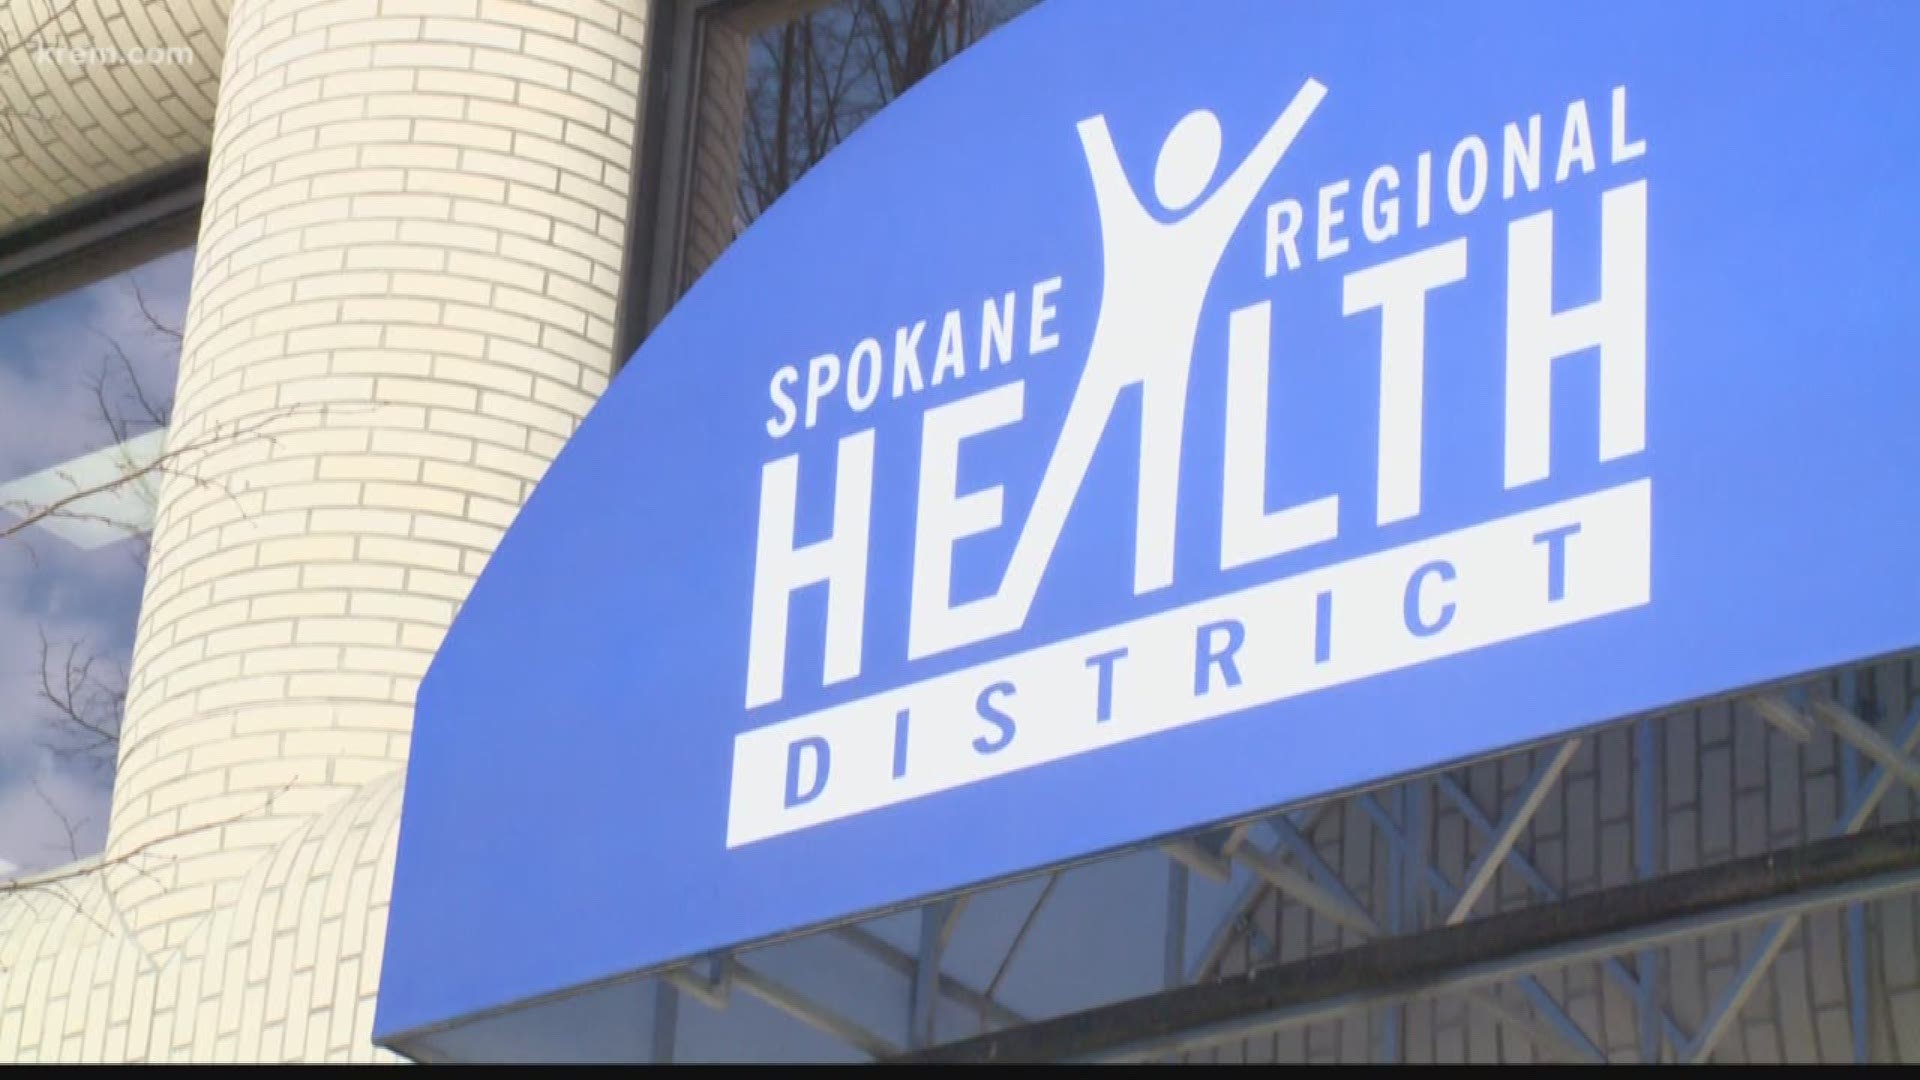 The Spokane Regional Health District tracks how many people have recovered from the virus, but it isn't possible to track every single case.